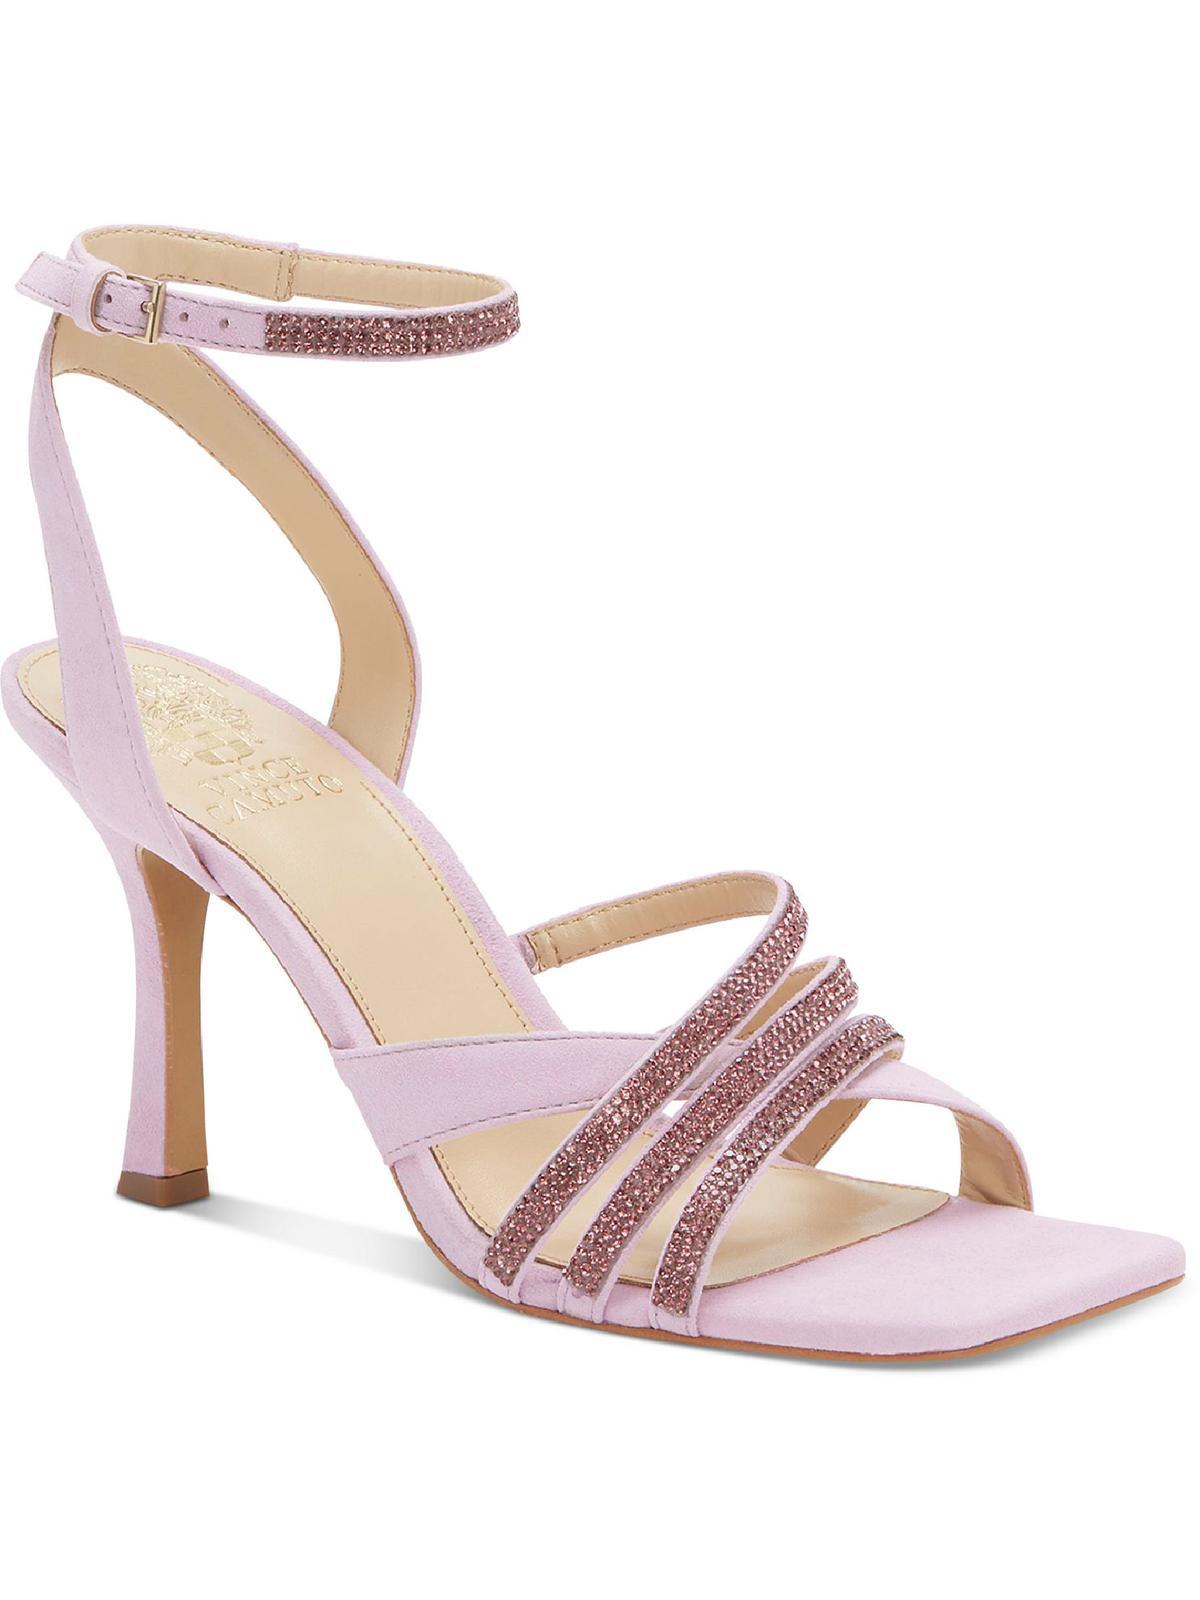 Vince Camuto Brevern Suede Square Toe Dress Heels in Pink | Lyst